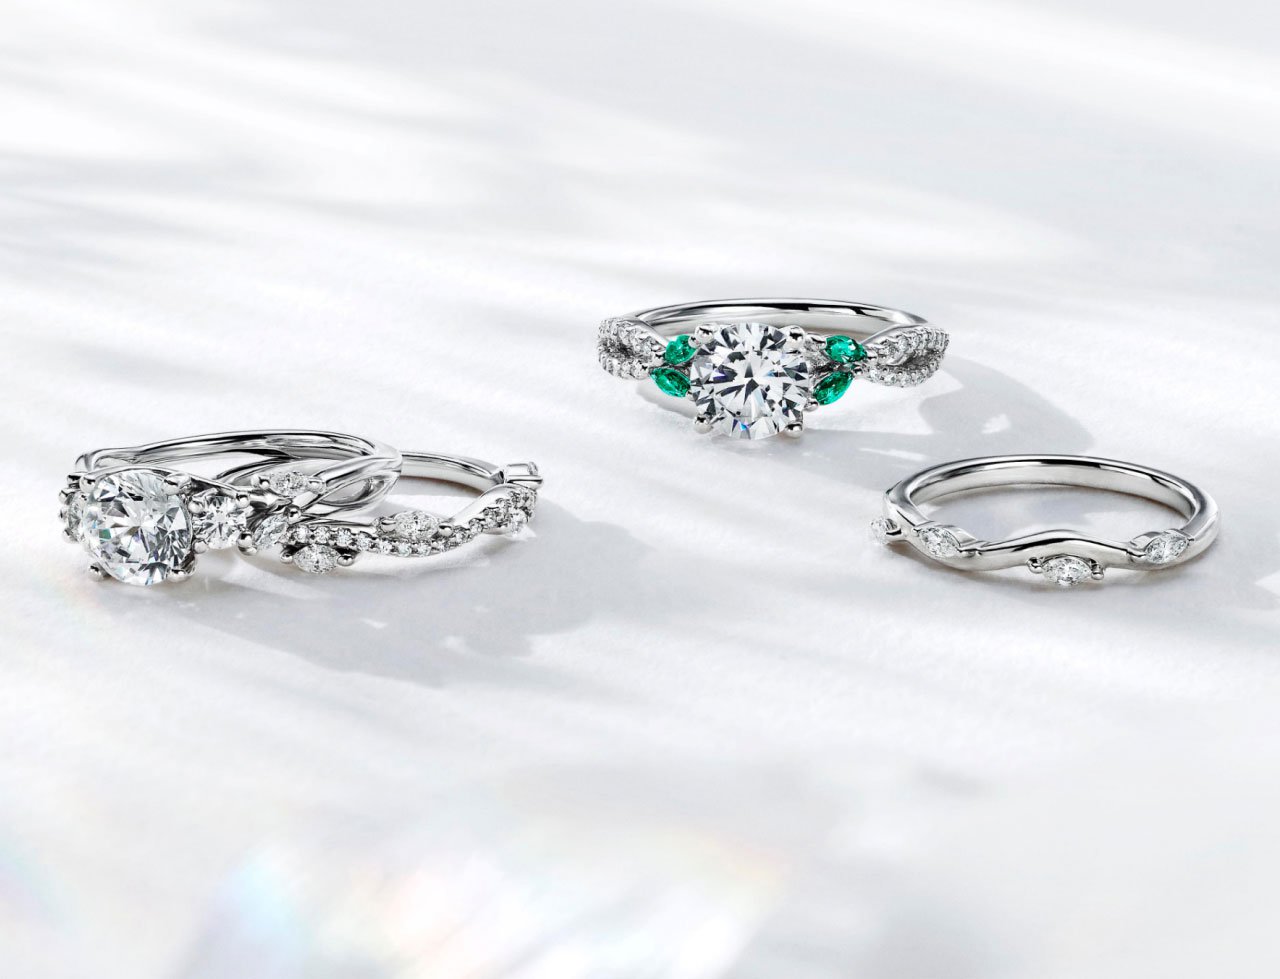 Diamond and gemstone engagement and wedding rings from Brilliant Earth's Willow collection.